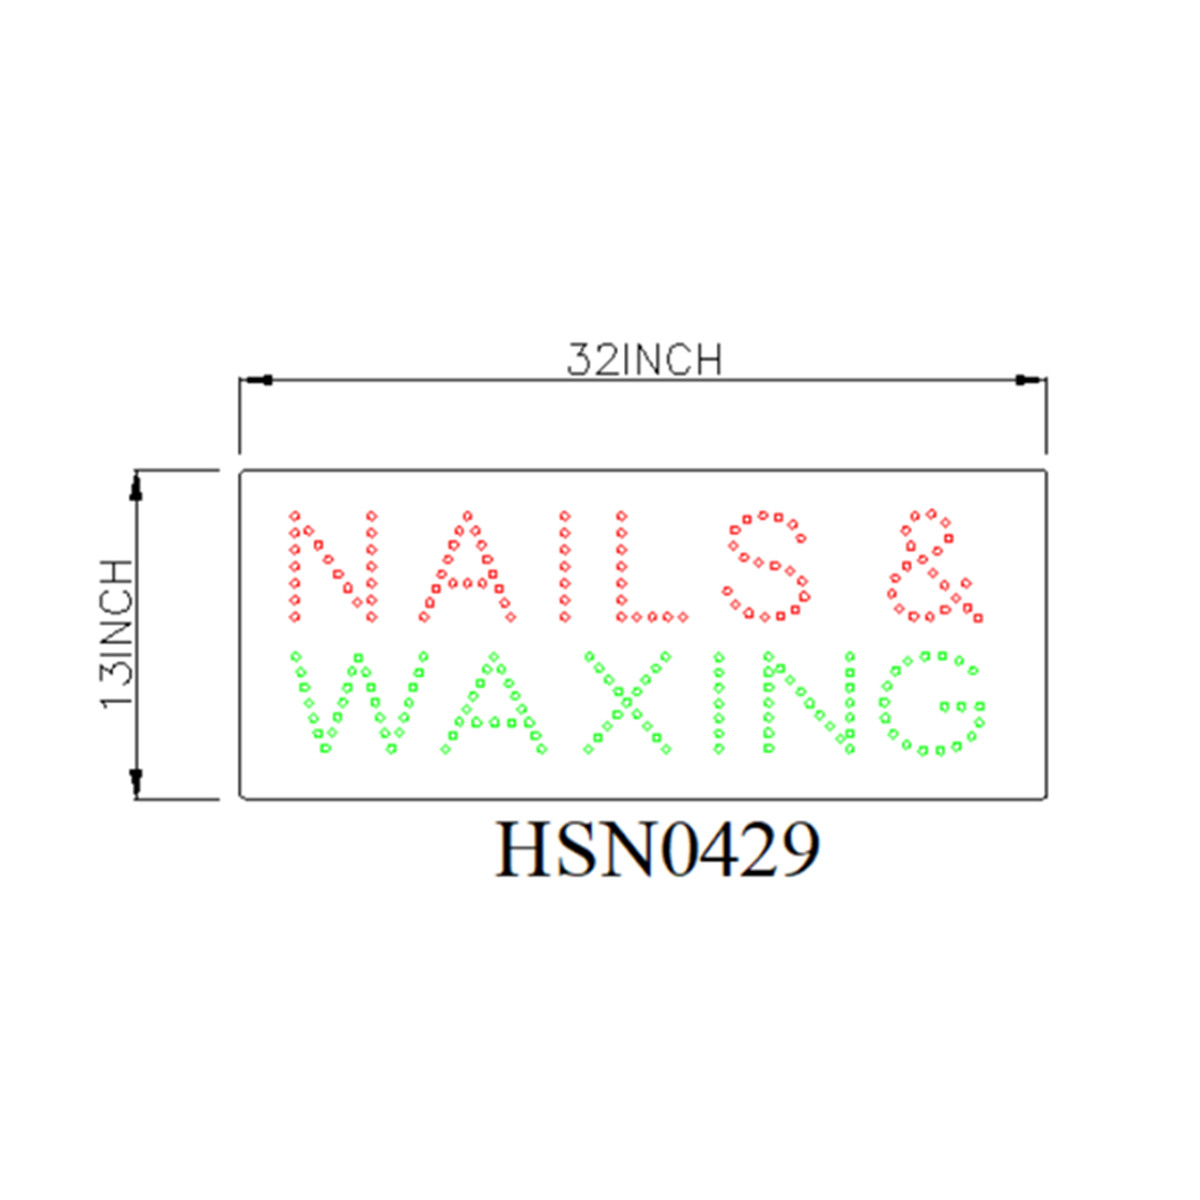 nails waxing business sign